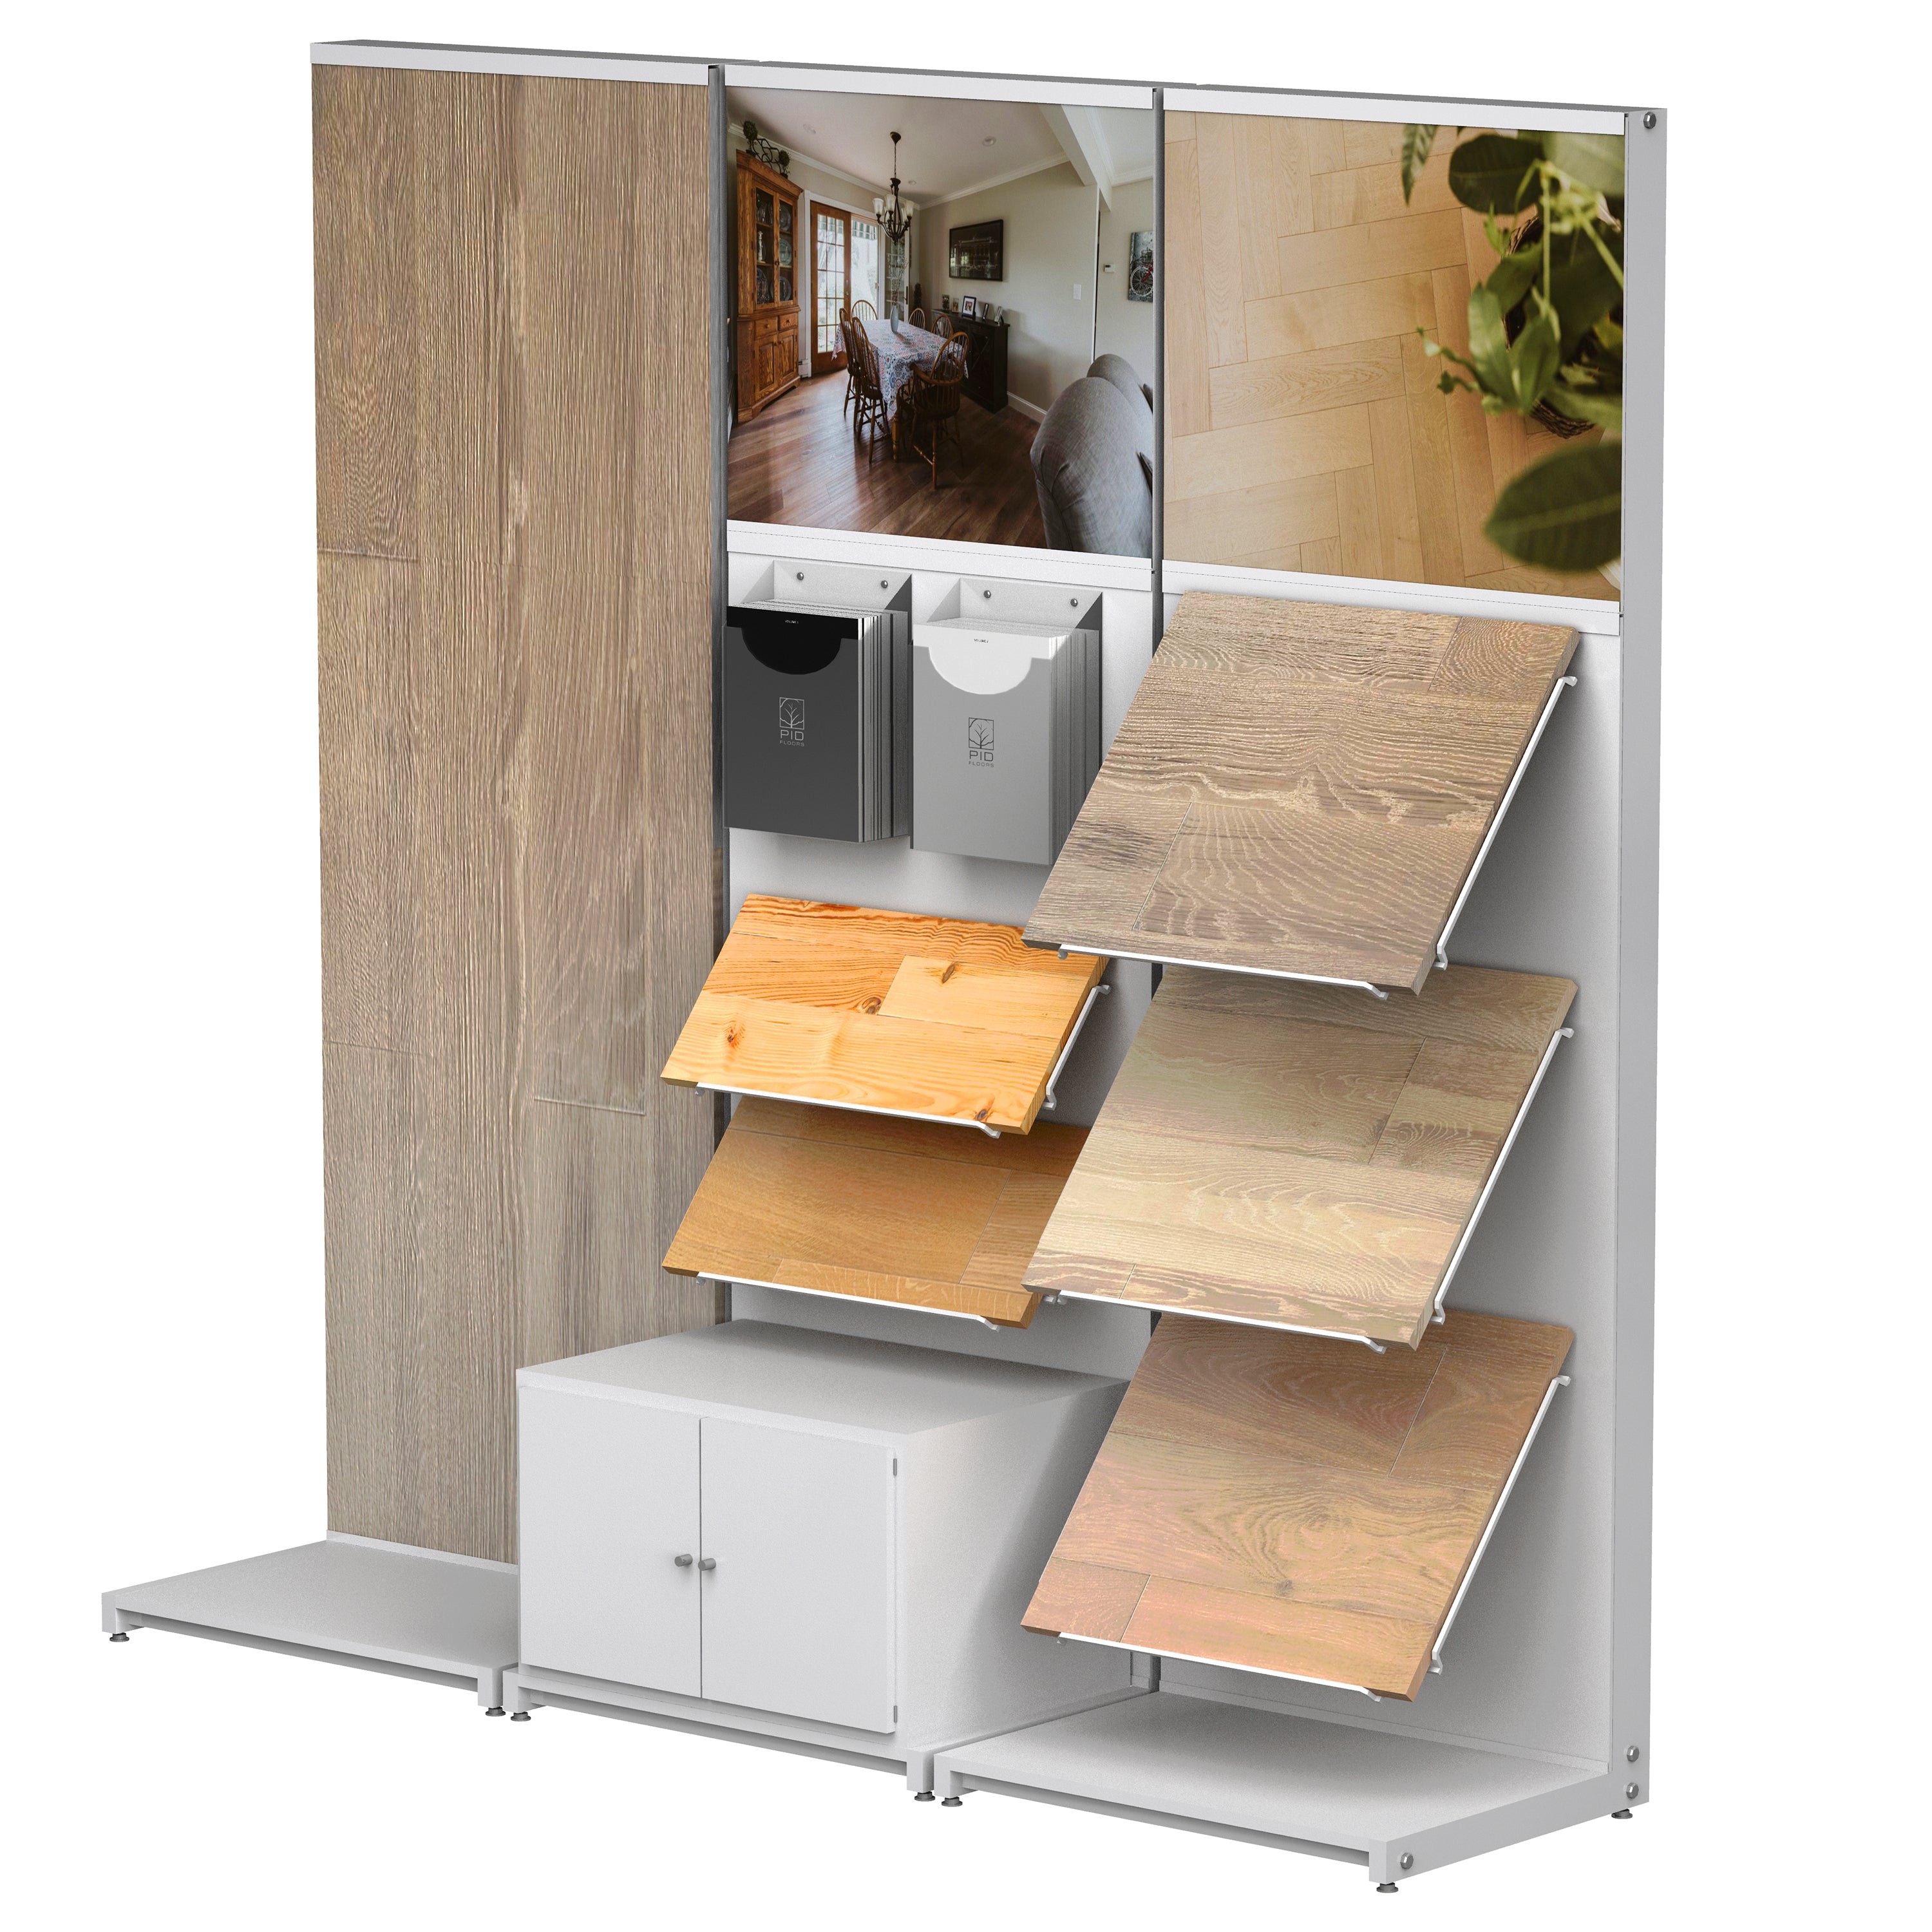 Freestanding Multifunction Towers with Shelves and Cabinet